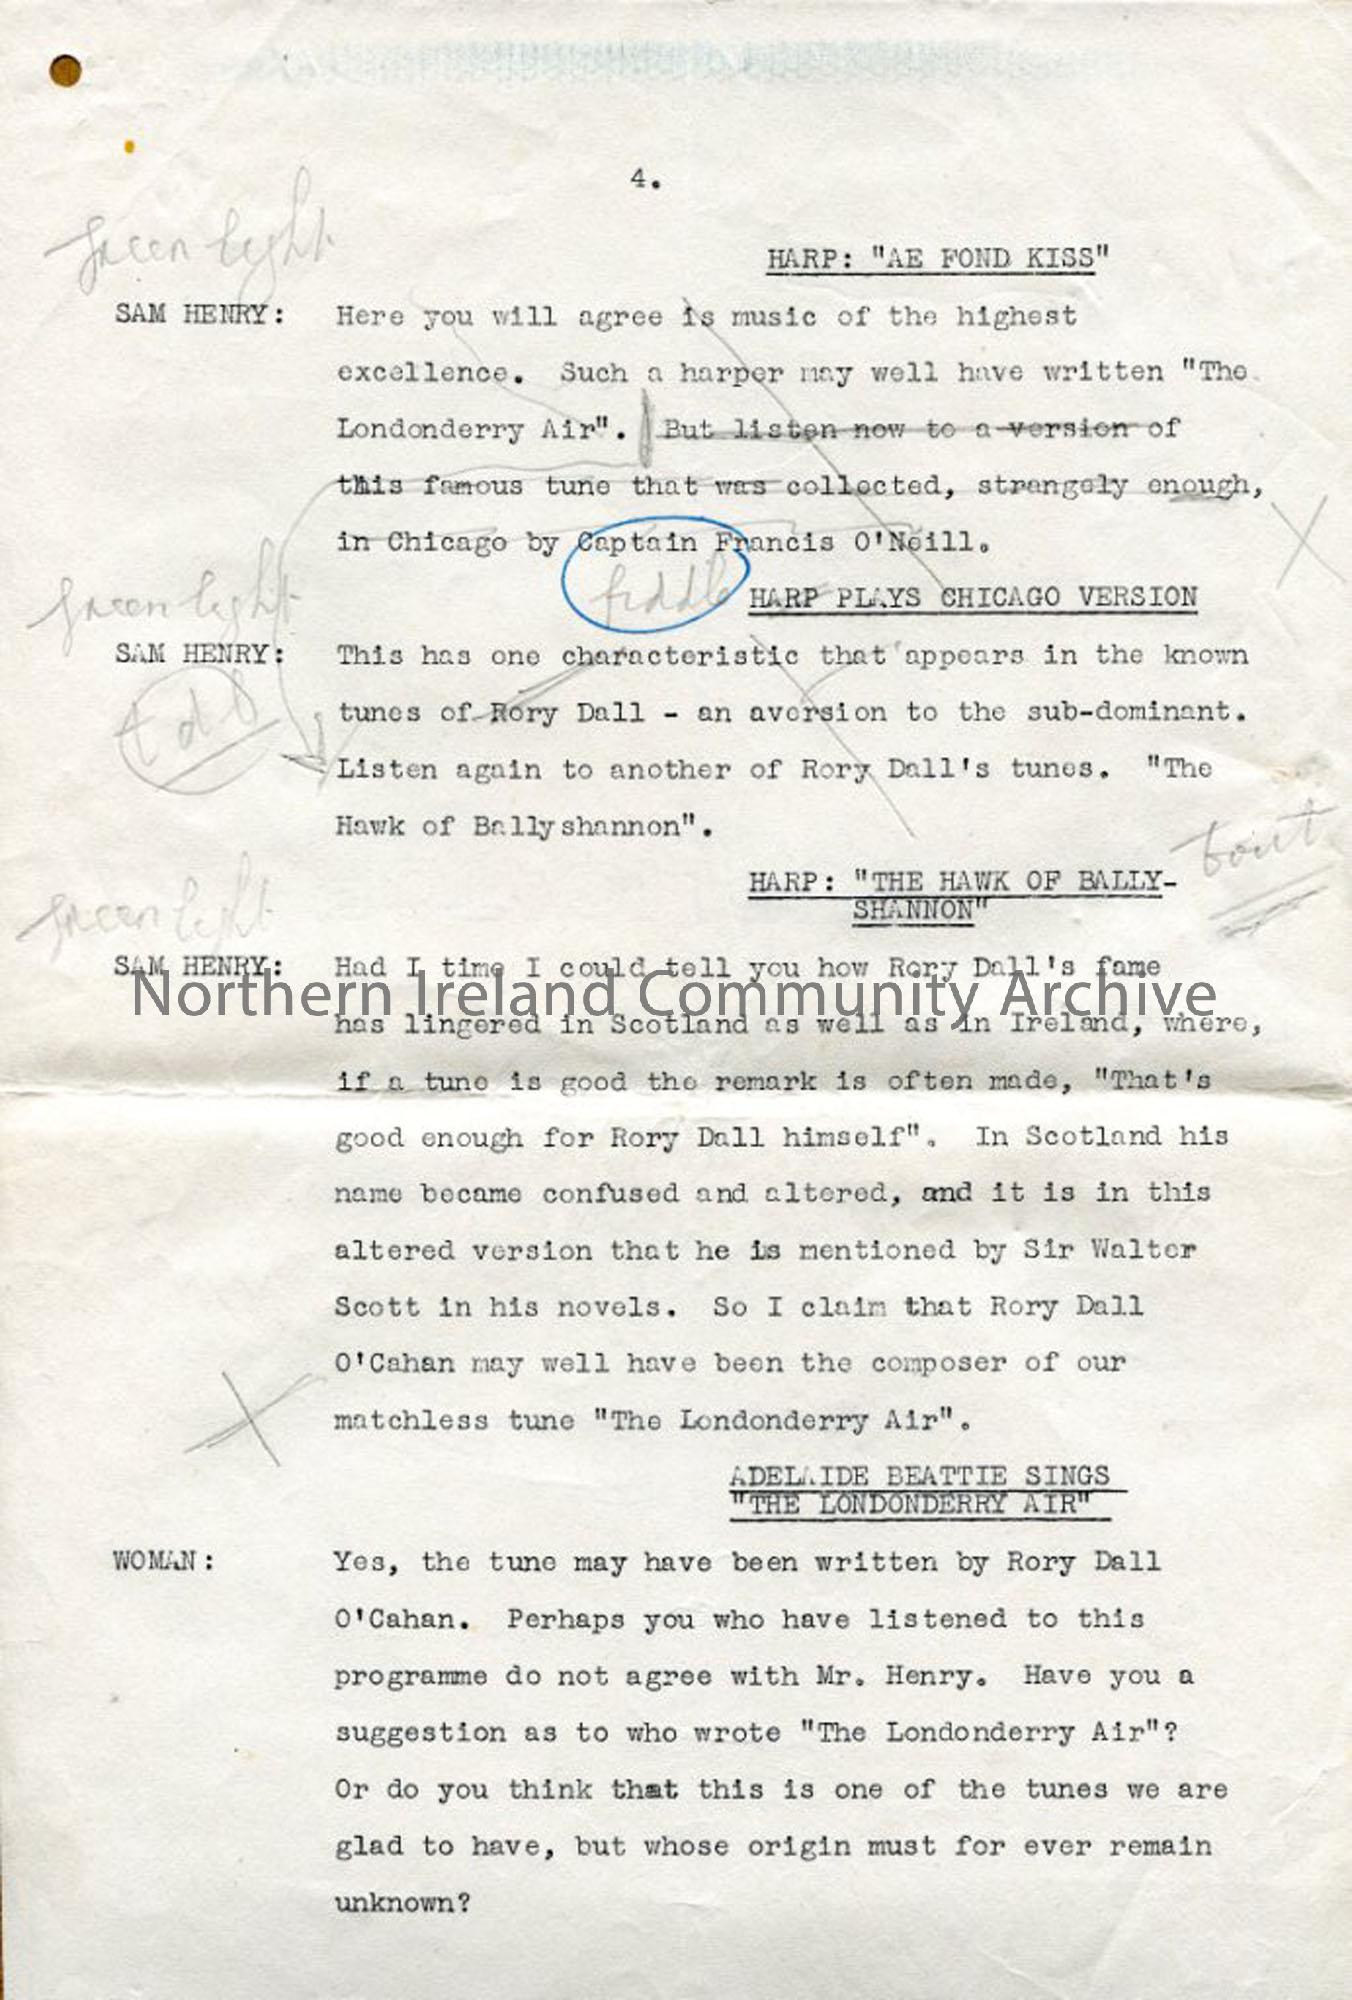 Page four of four pages – script for broadcast ‘Who wrote the Londonderry Air?’